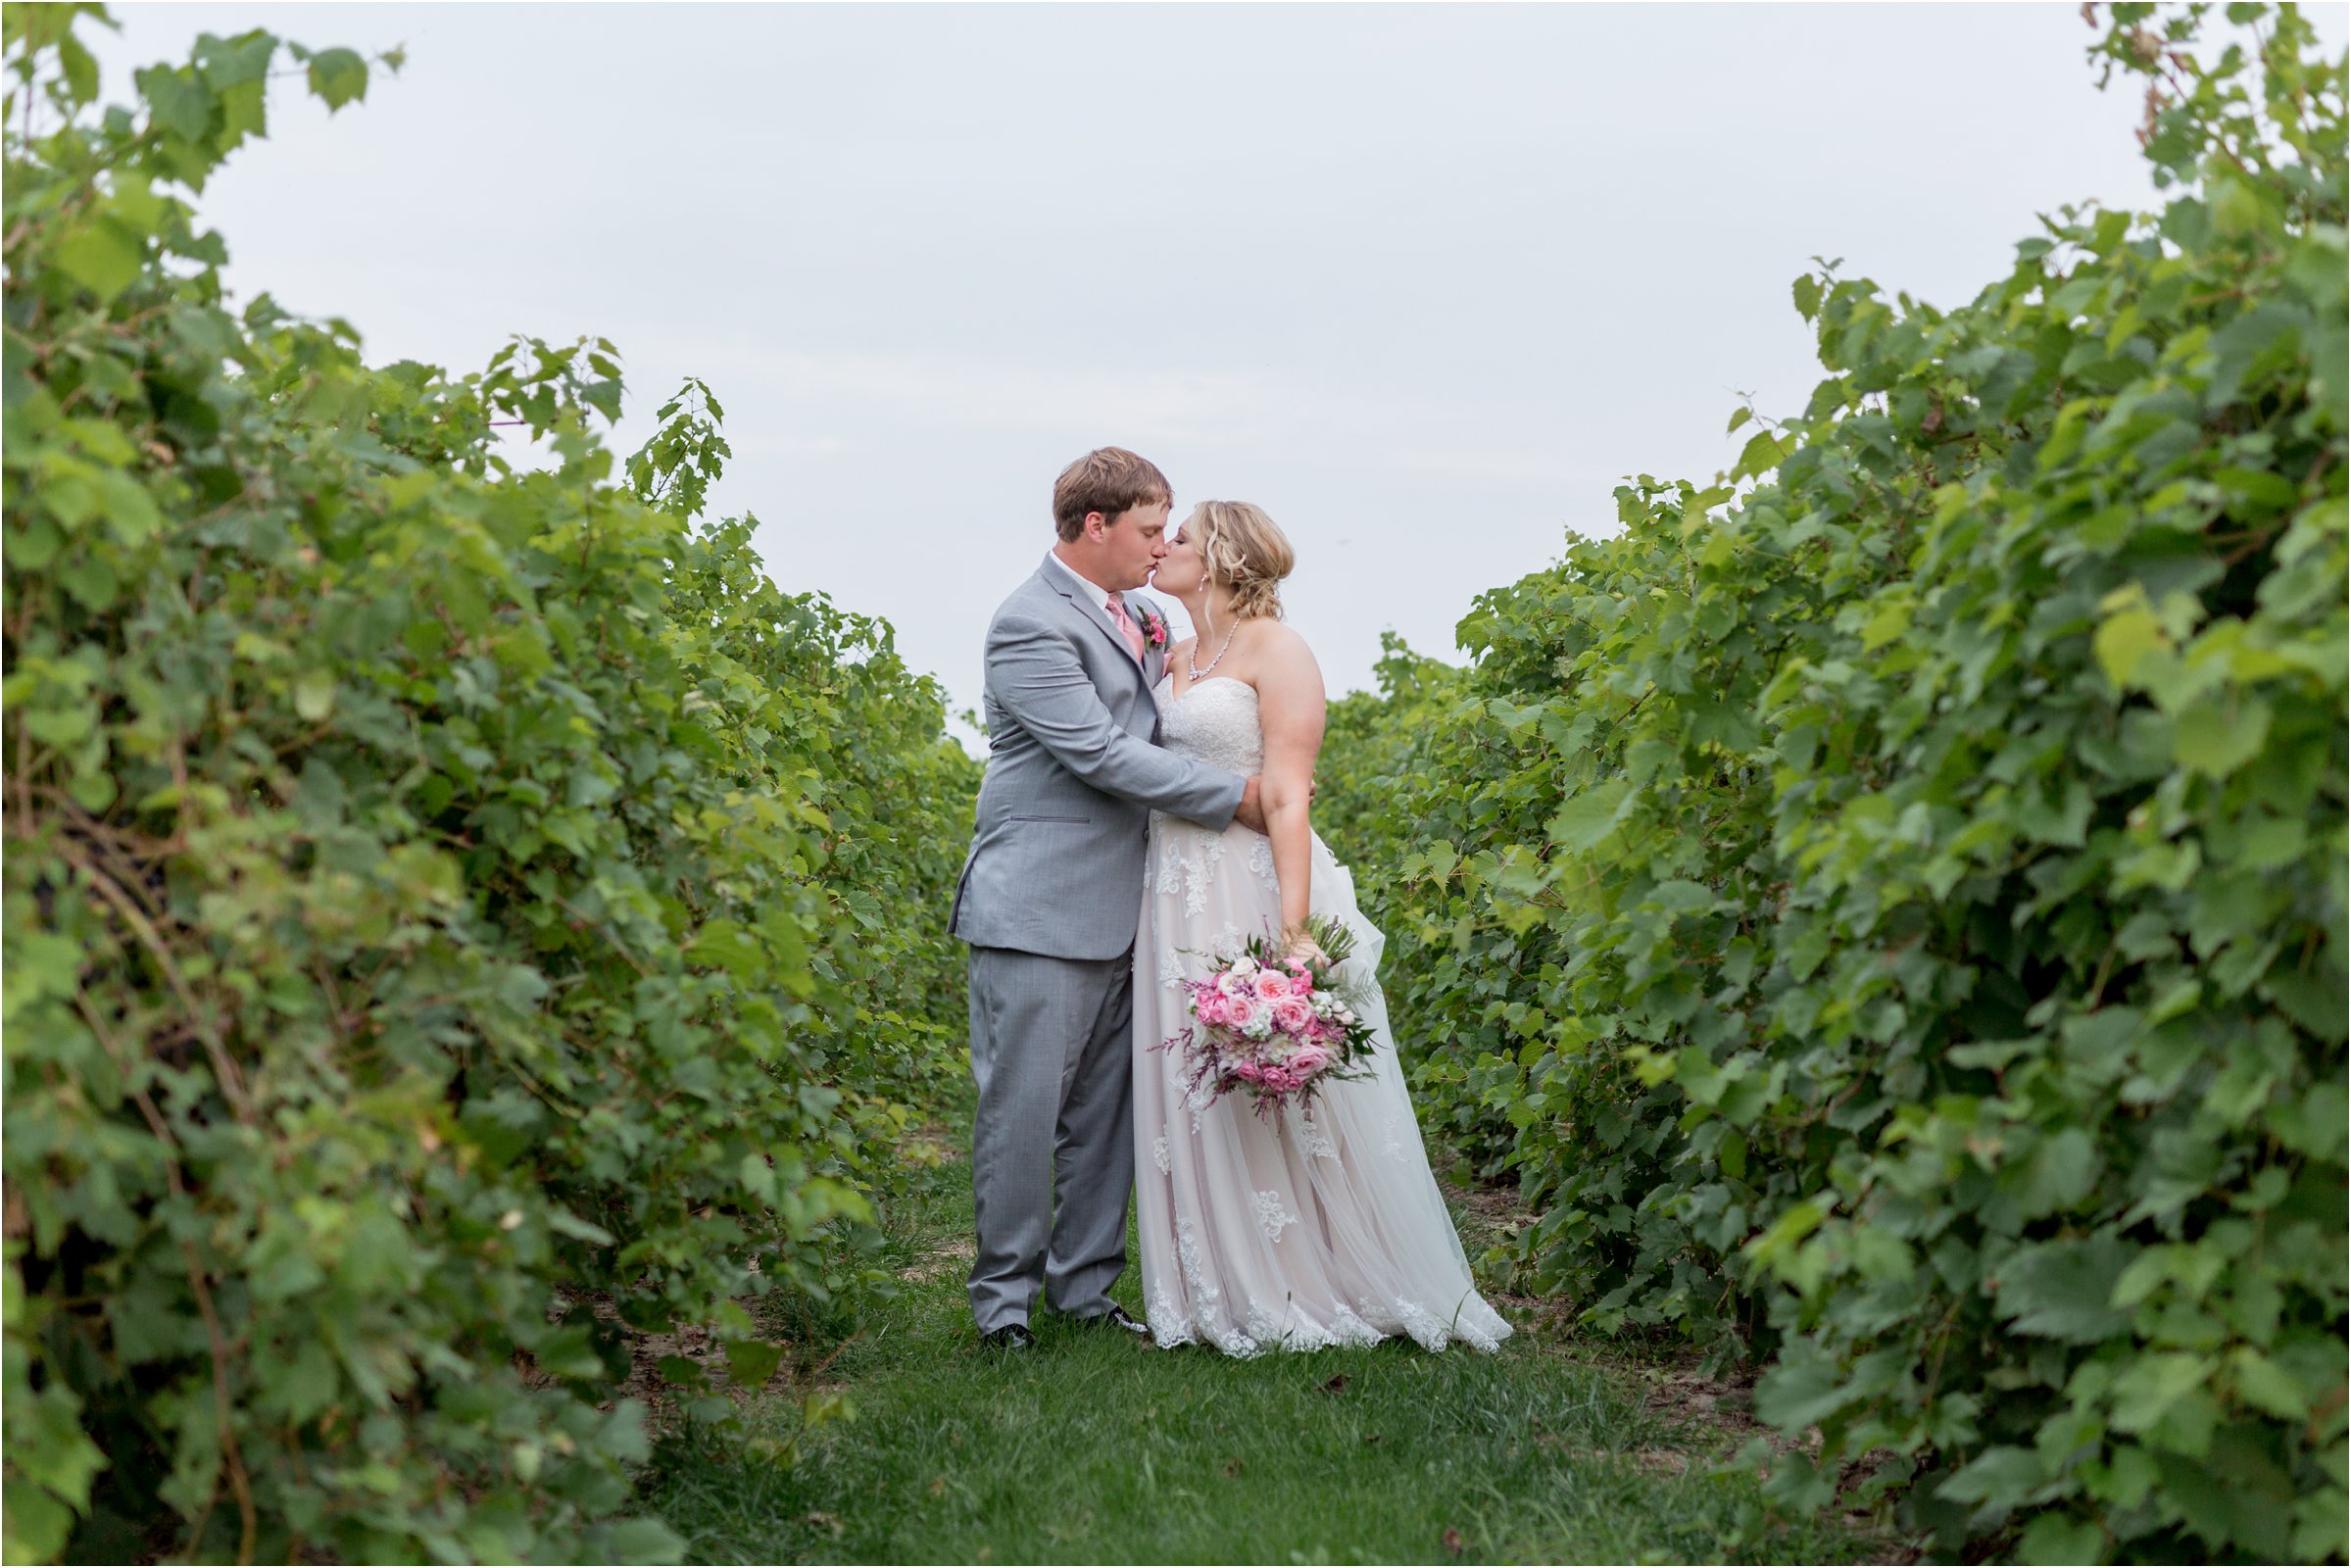 the bride and groom snuggle together in between grape vines with the bride's large bouquet